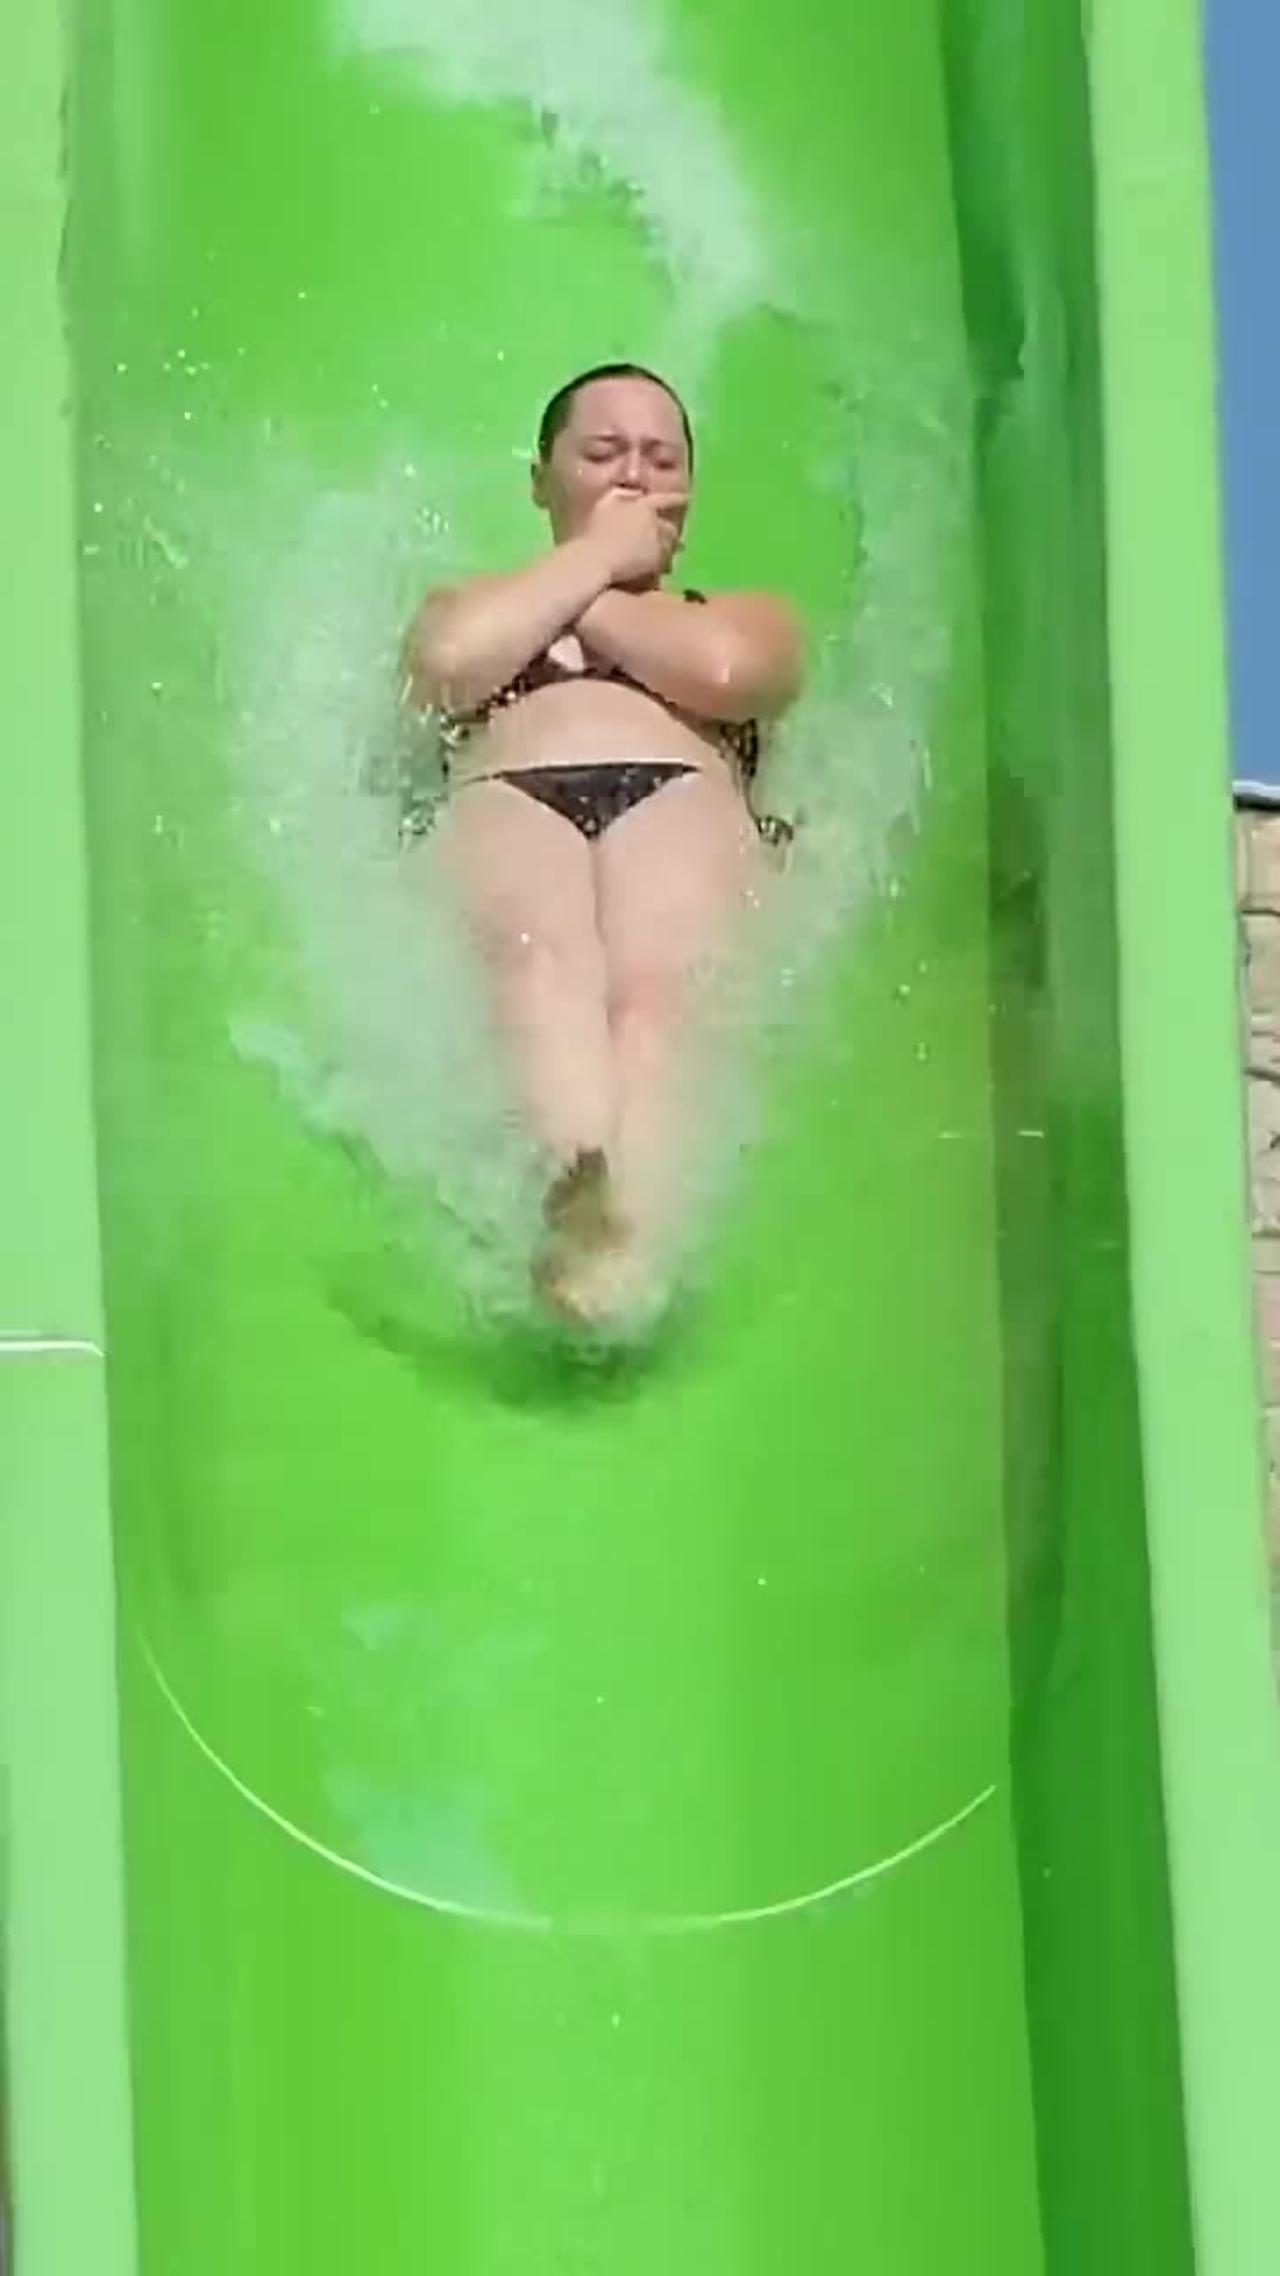 Fast Slides At The Waterpark